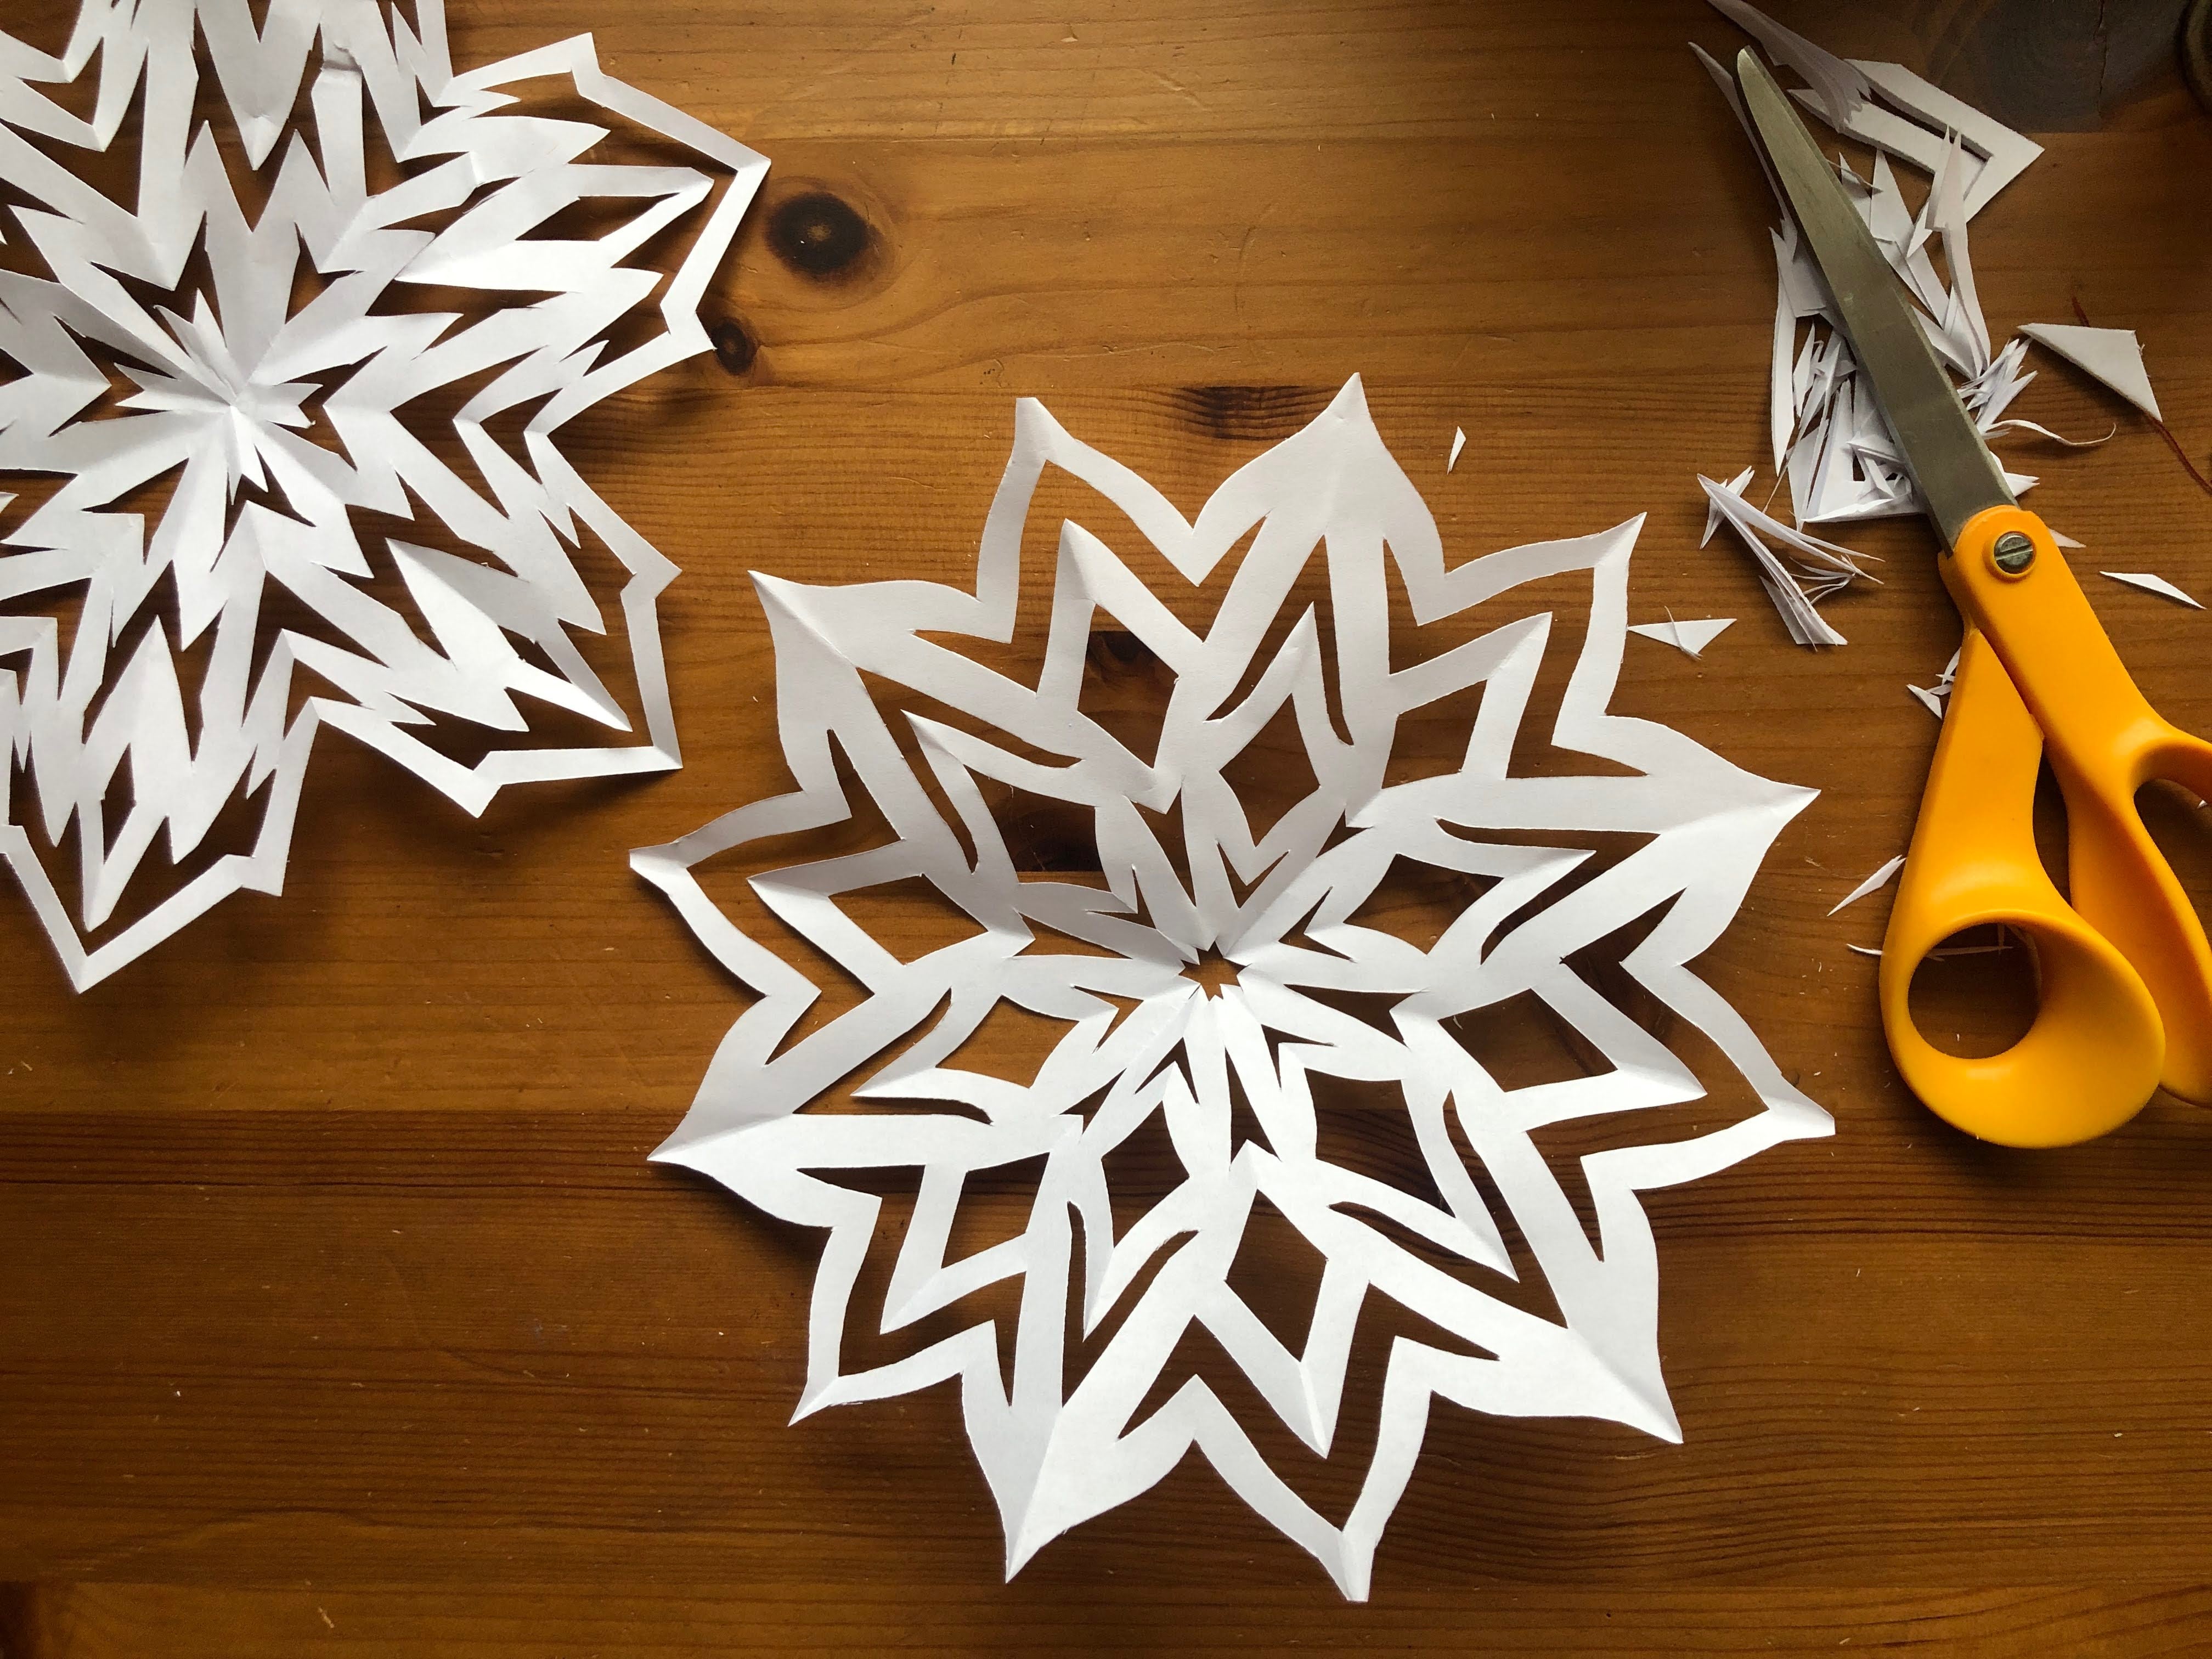 Winter craft: How to make paper snowflakes 